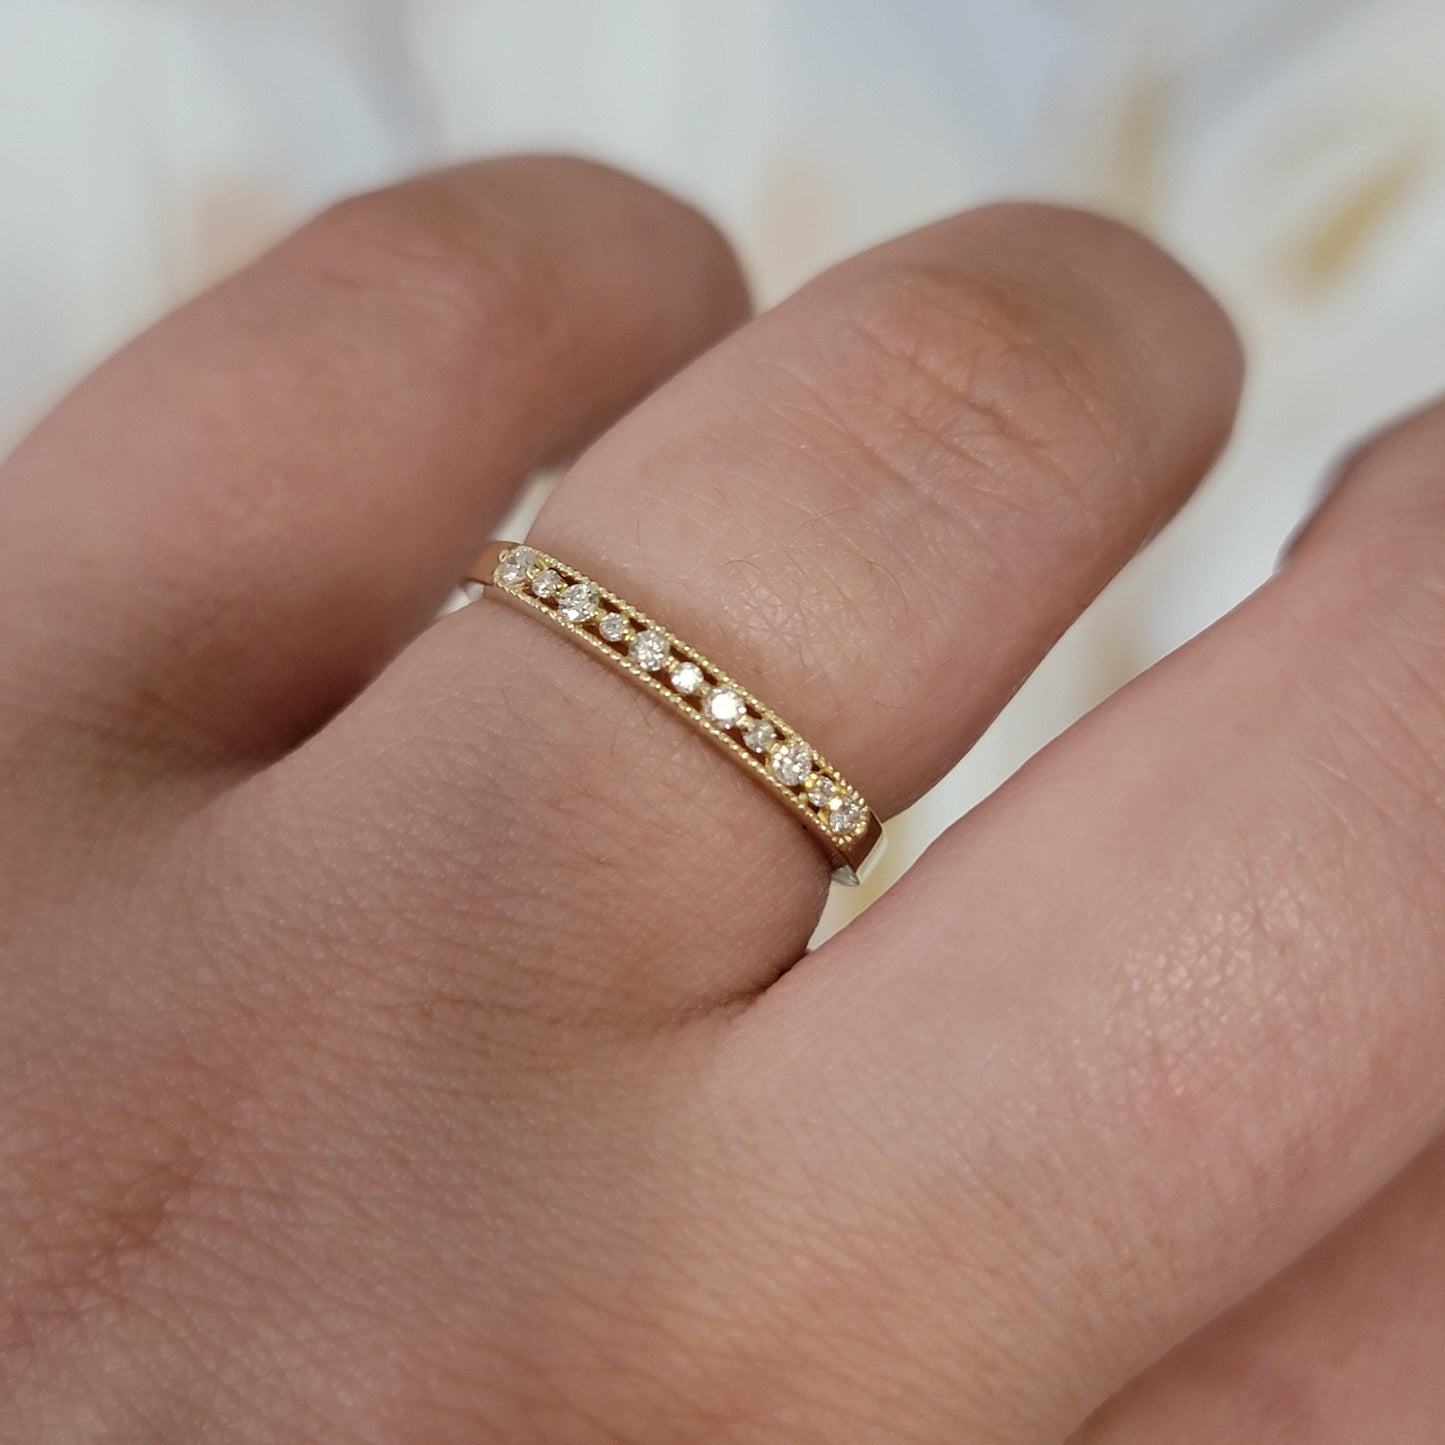 Diamond Wedding Band, 14K Gold Ring, Genuine Diamond Ring, Matching Band for Engagement Ring, Anniversary Ring, Gift for Her